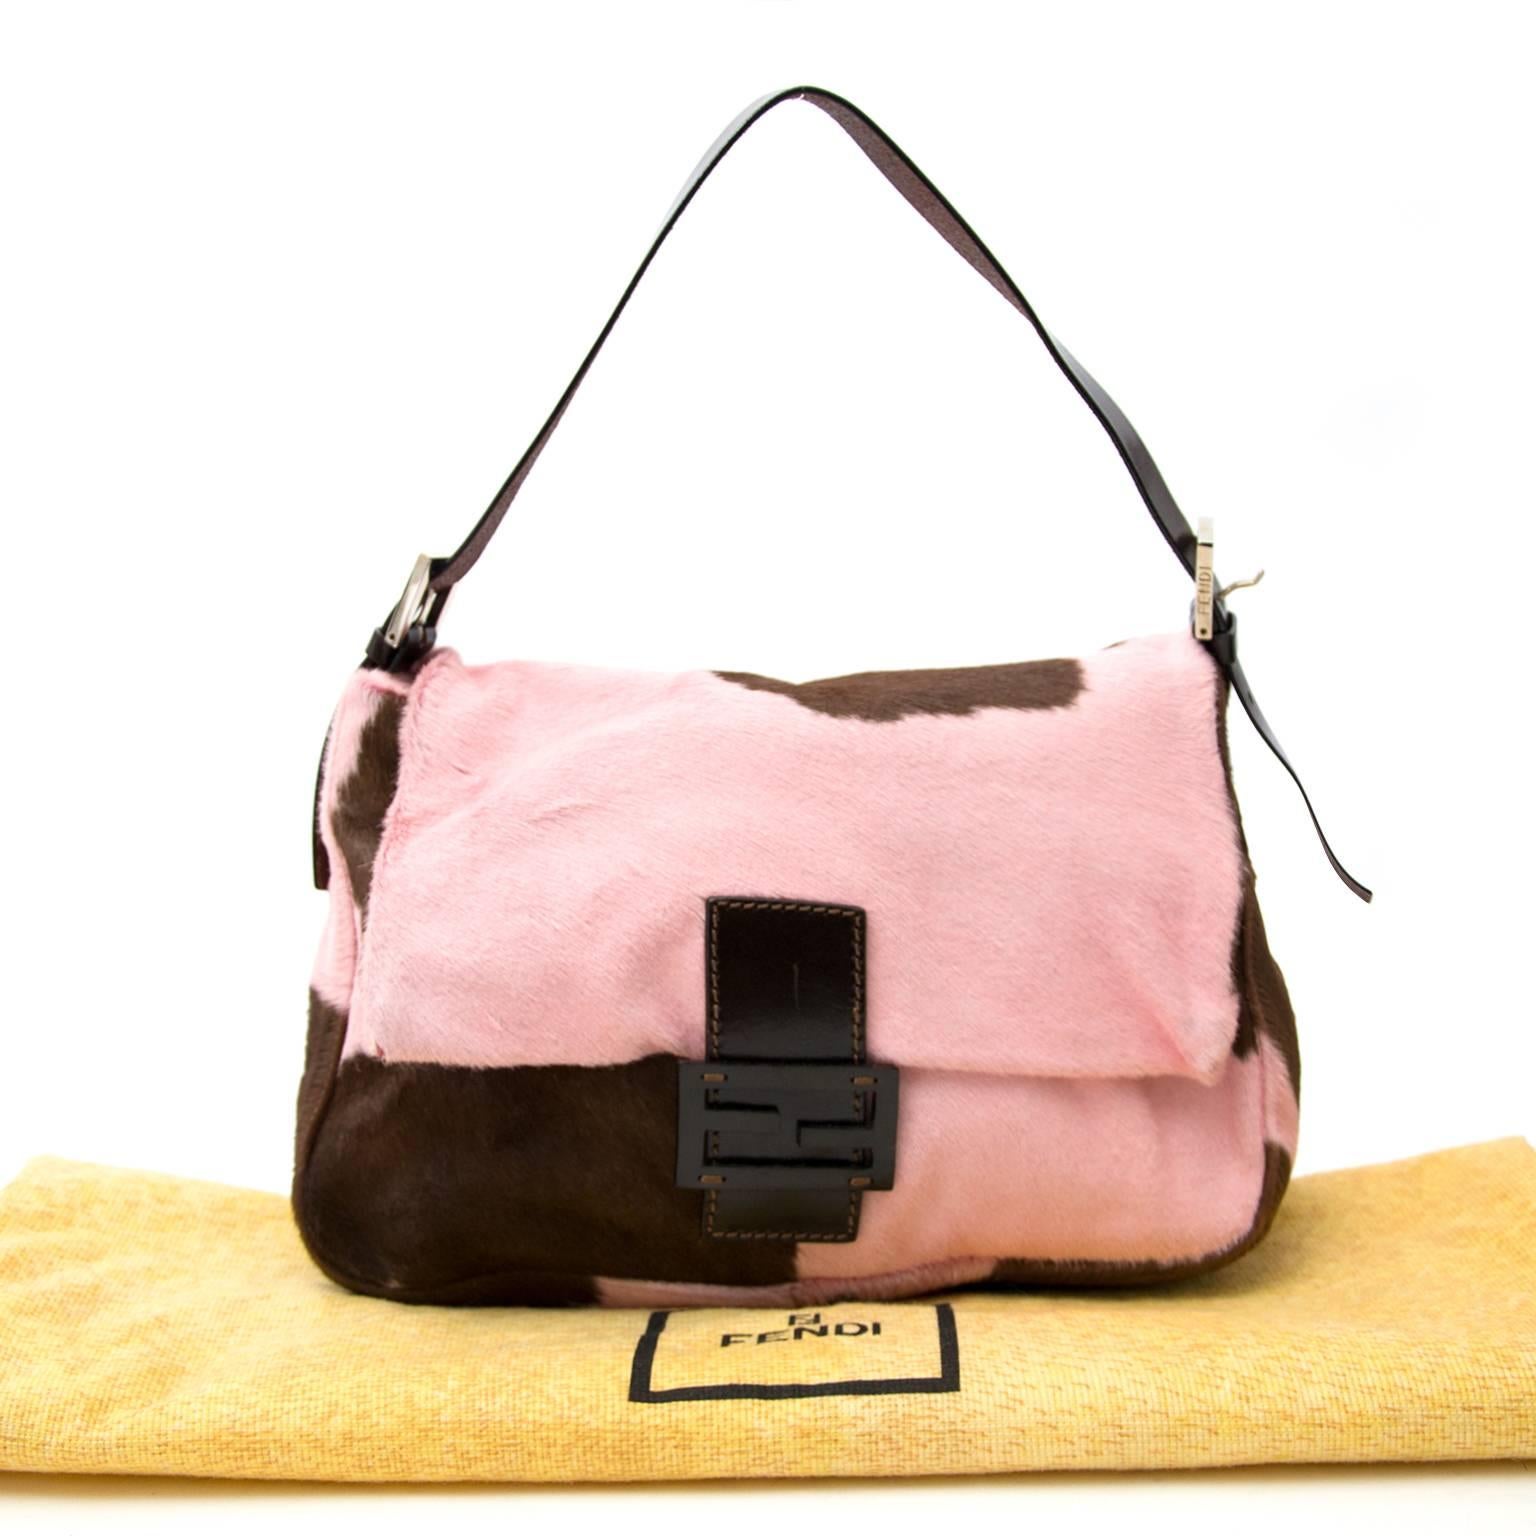 Excellent preloved condition

Fendi Medium Pony Hair Baguette

Pink and brown printed ponyhair Fendi baguette with silver-tone hardware, brown leather trim, flat shoulder strap with buckle adjustments, brown satin interior lining, single interior